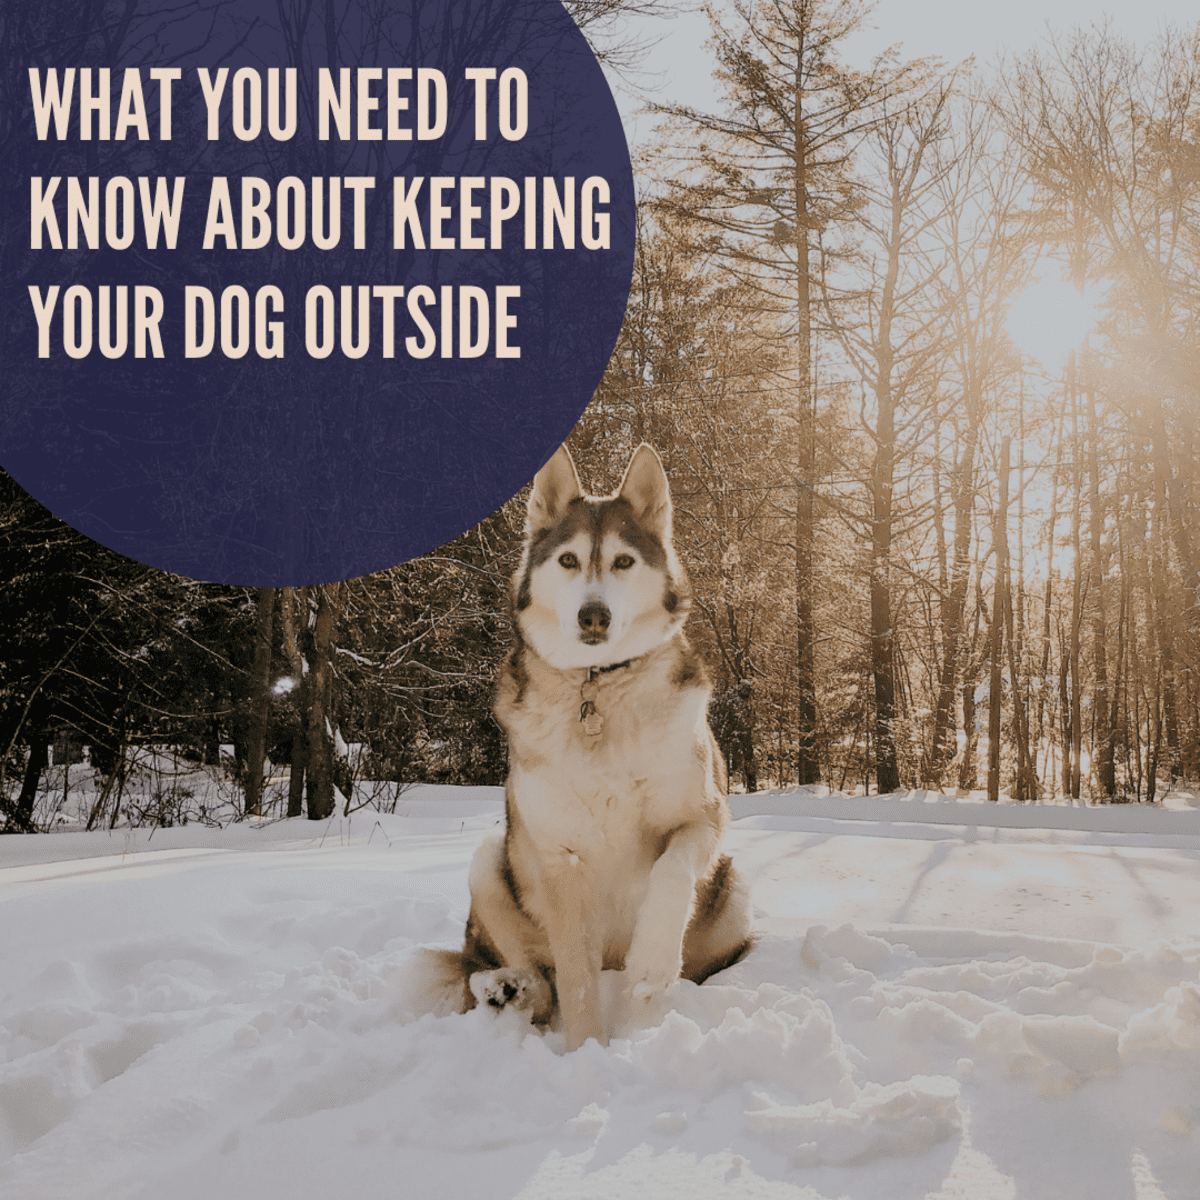 What You Need to Know About Keeping Your Dog Outside - PetHelpful